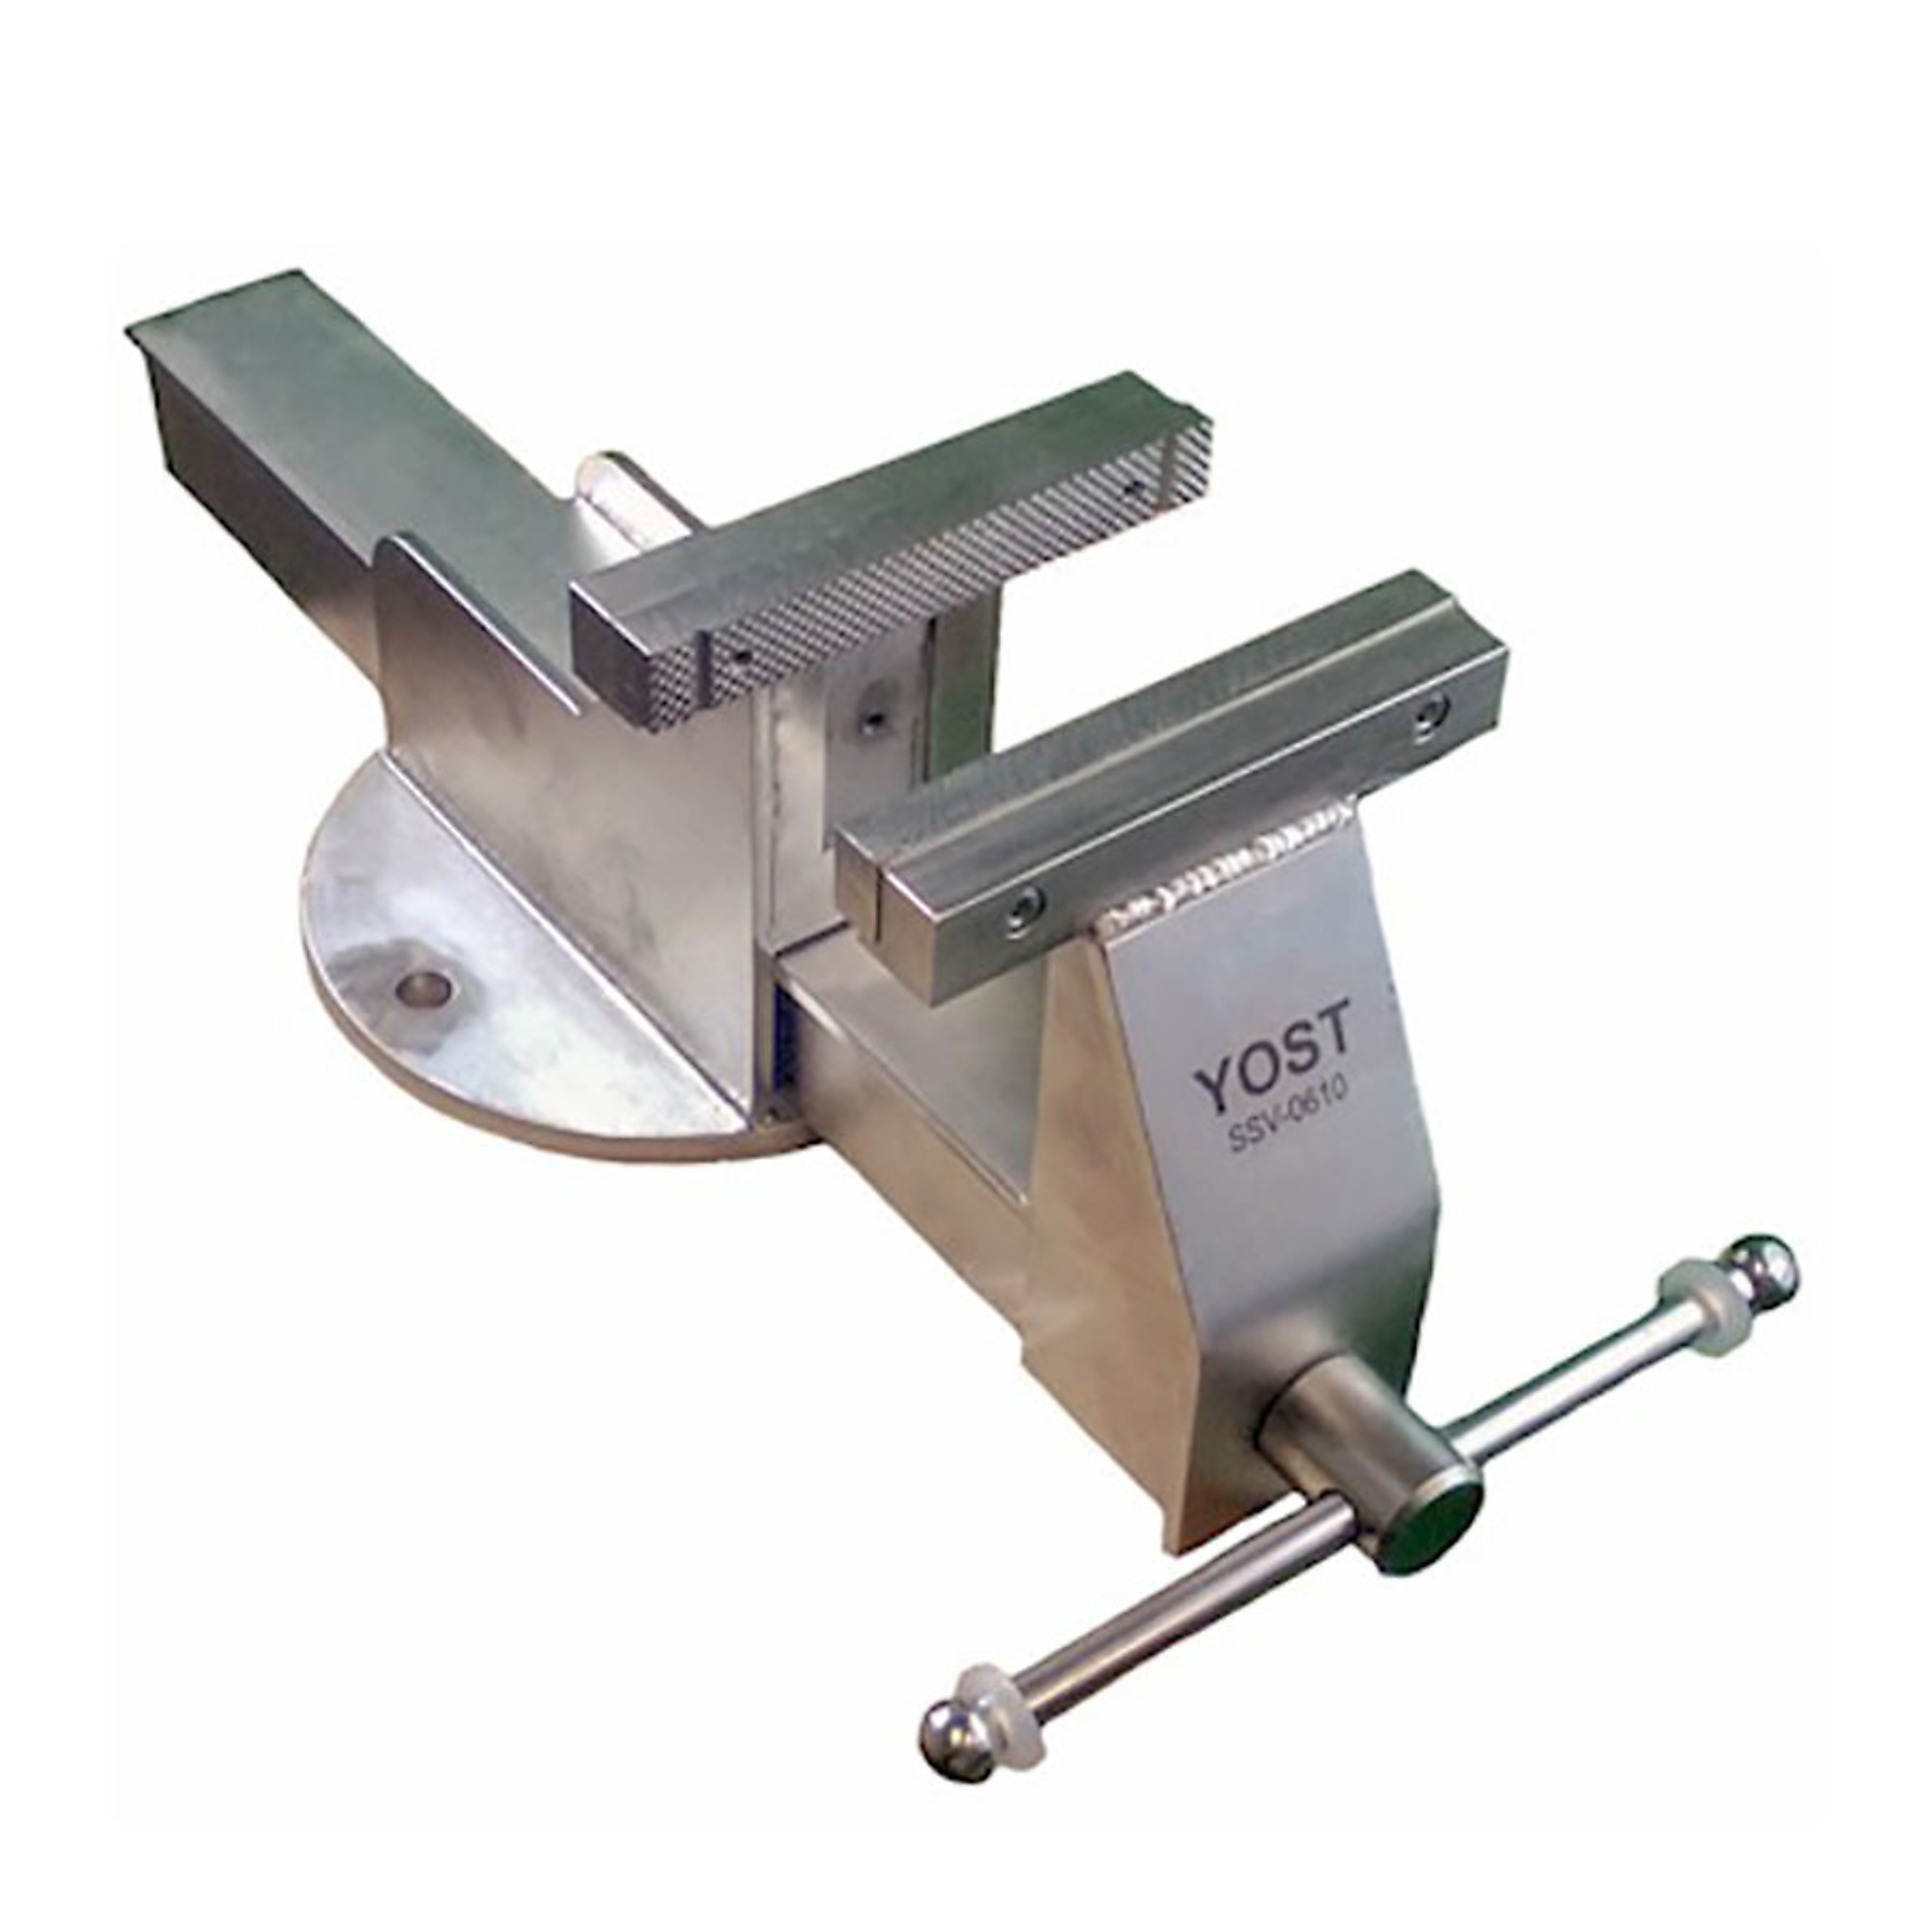 Yost Vises, 6Inch Stainless Steel Vise, Jaw Width 6 in, Jaw Capacity 10 in, Material Stainless Steel, Model SSV-0610N